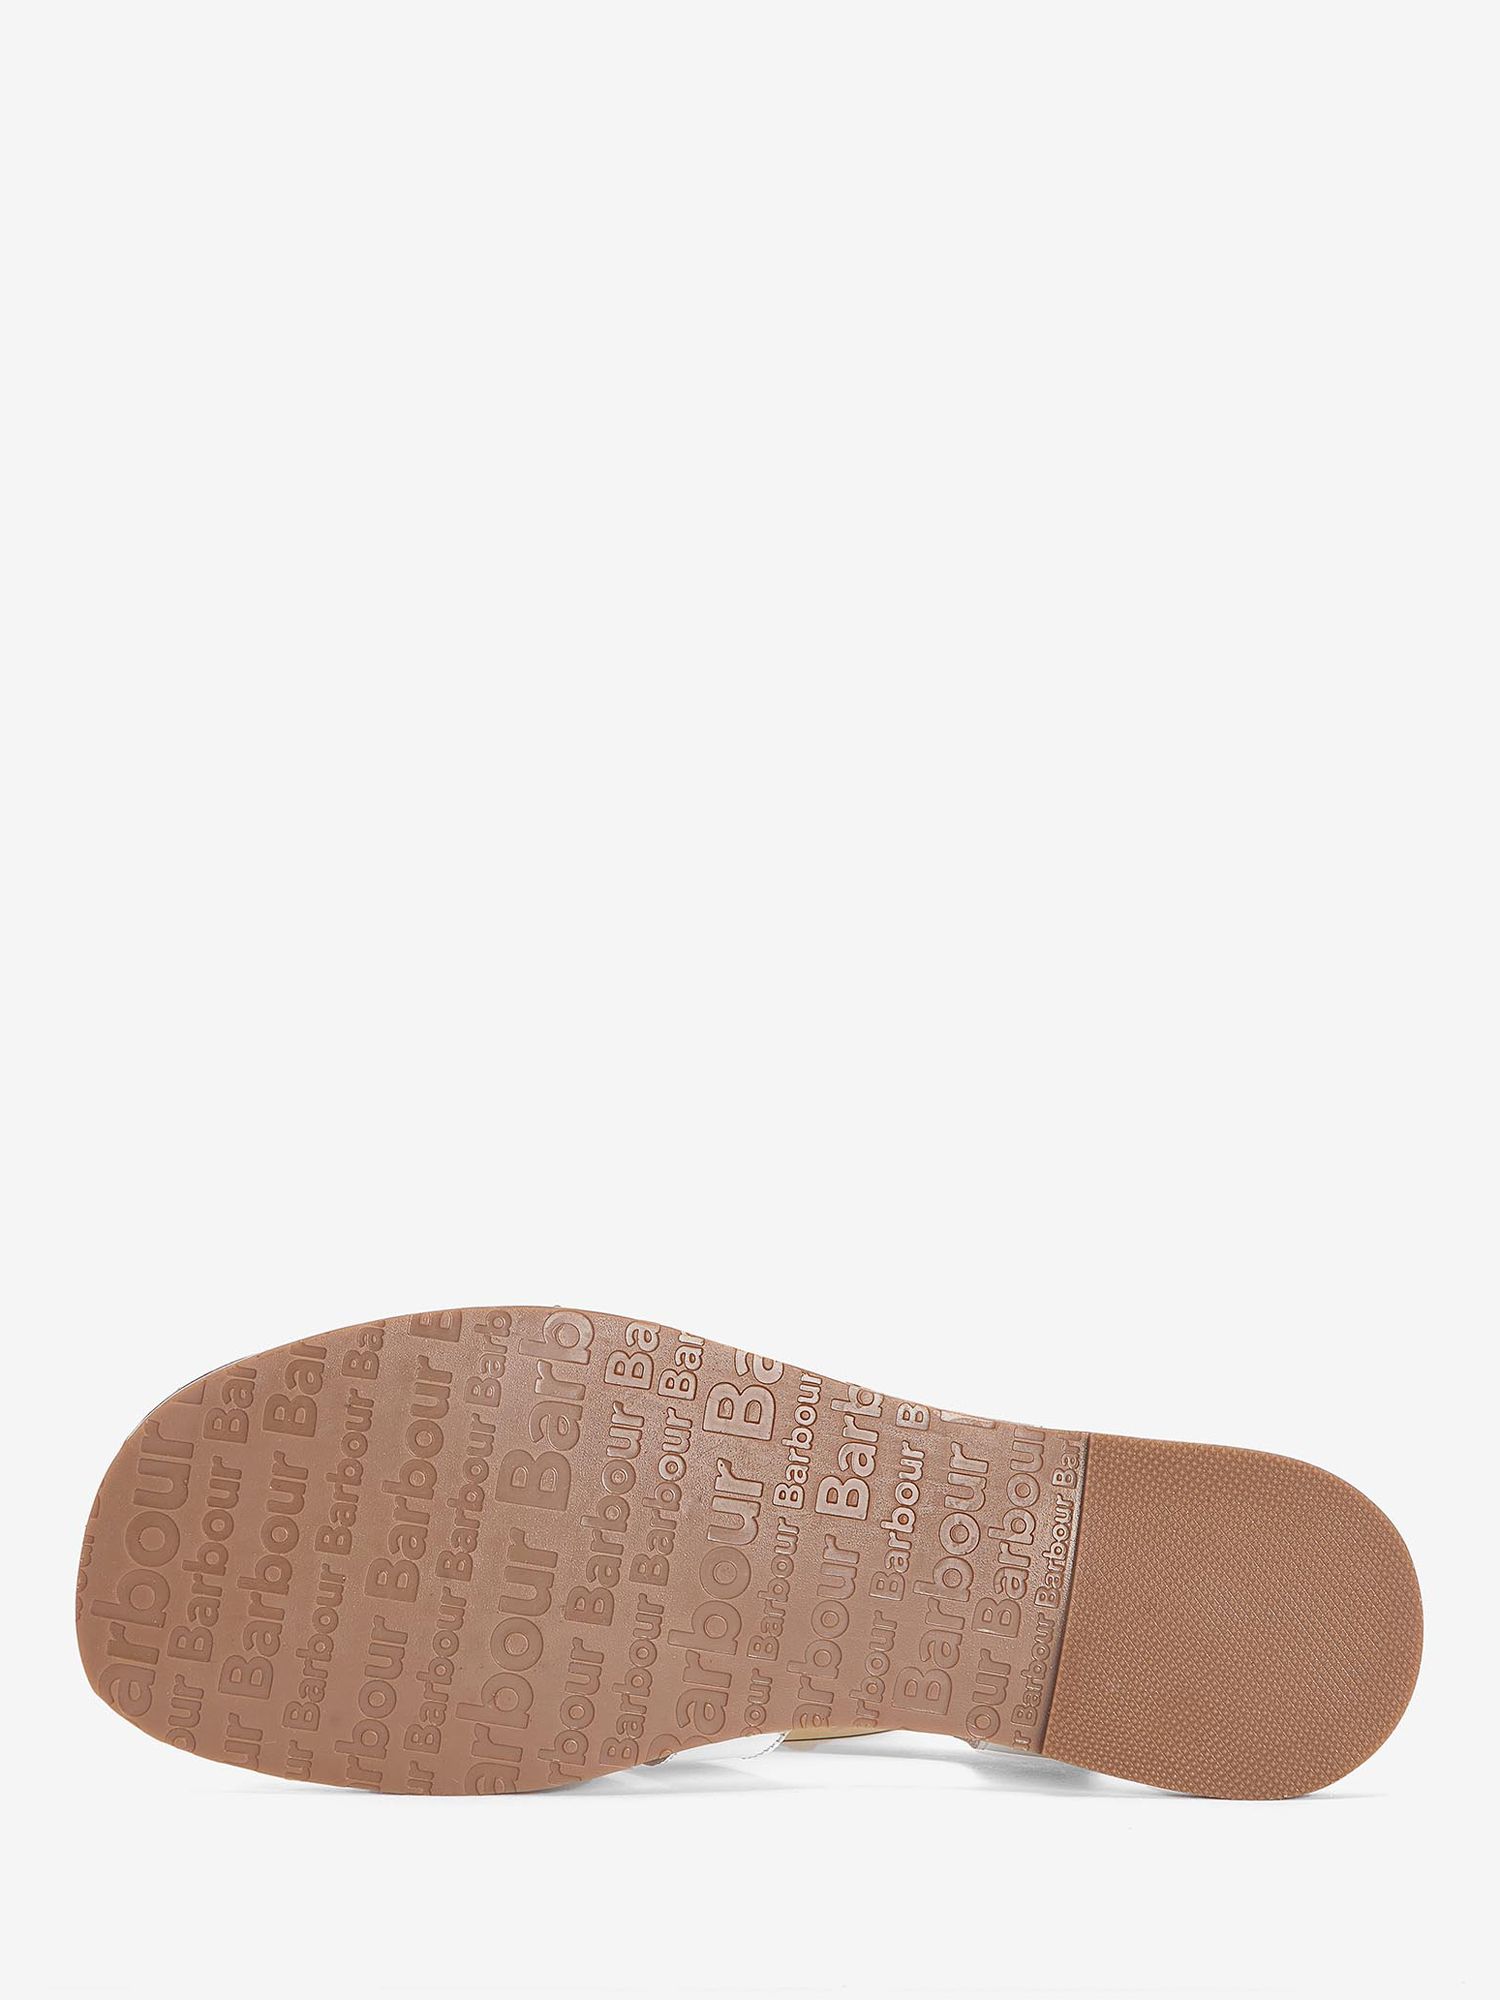 Buy Barbour Macy Leather Sandals Online at johnlewis.com